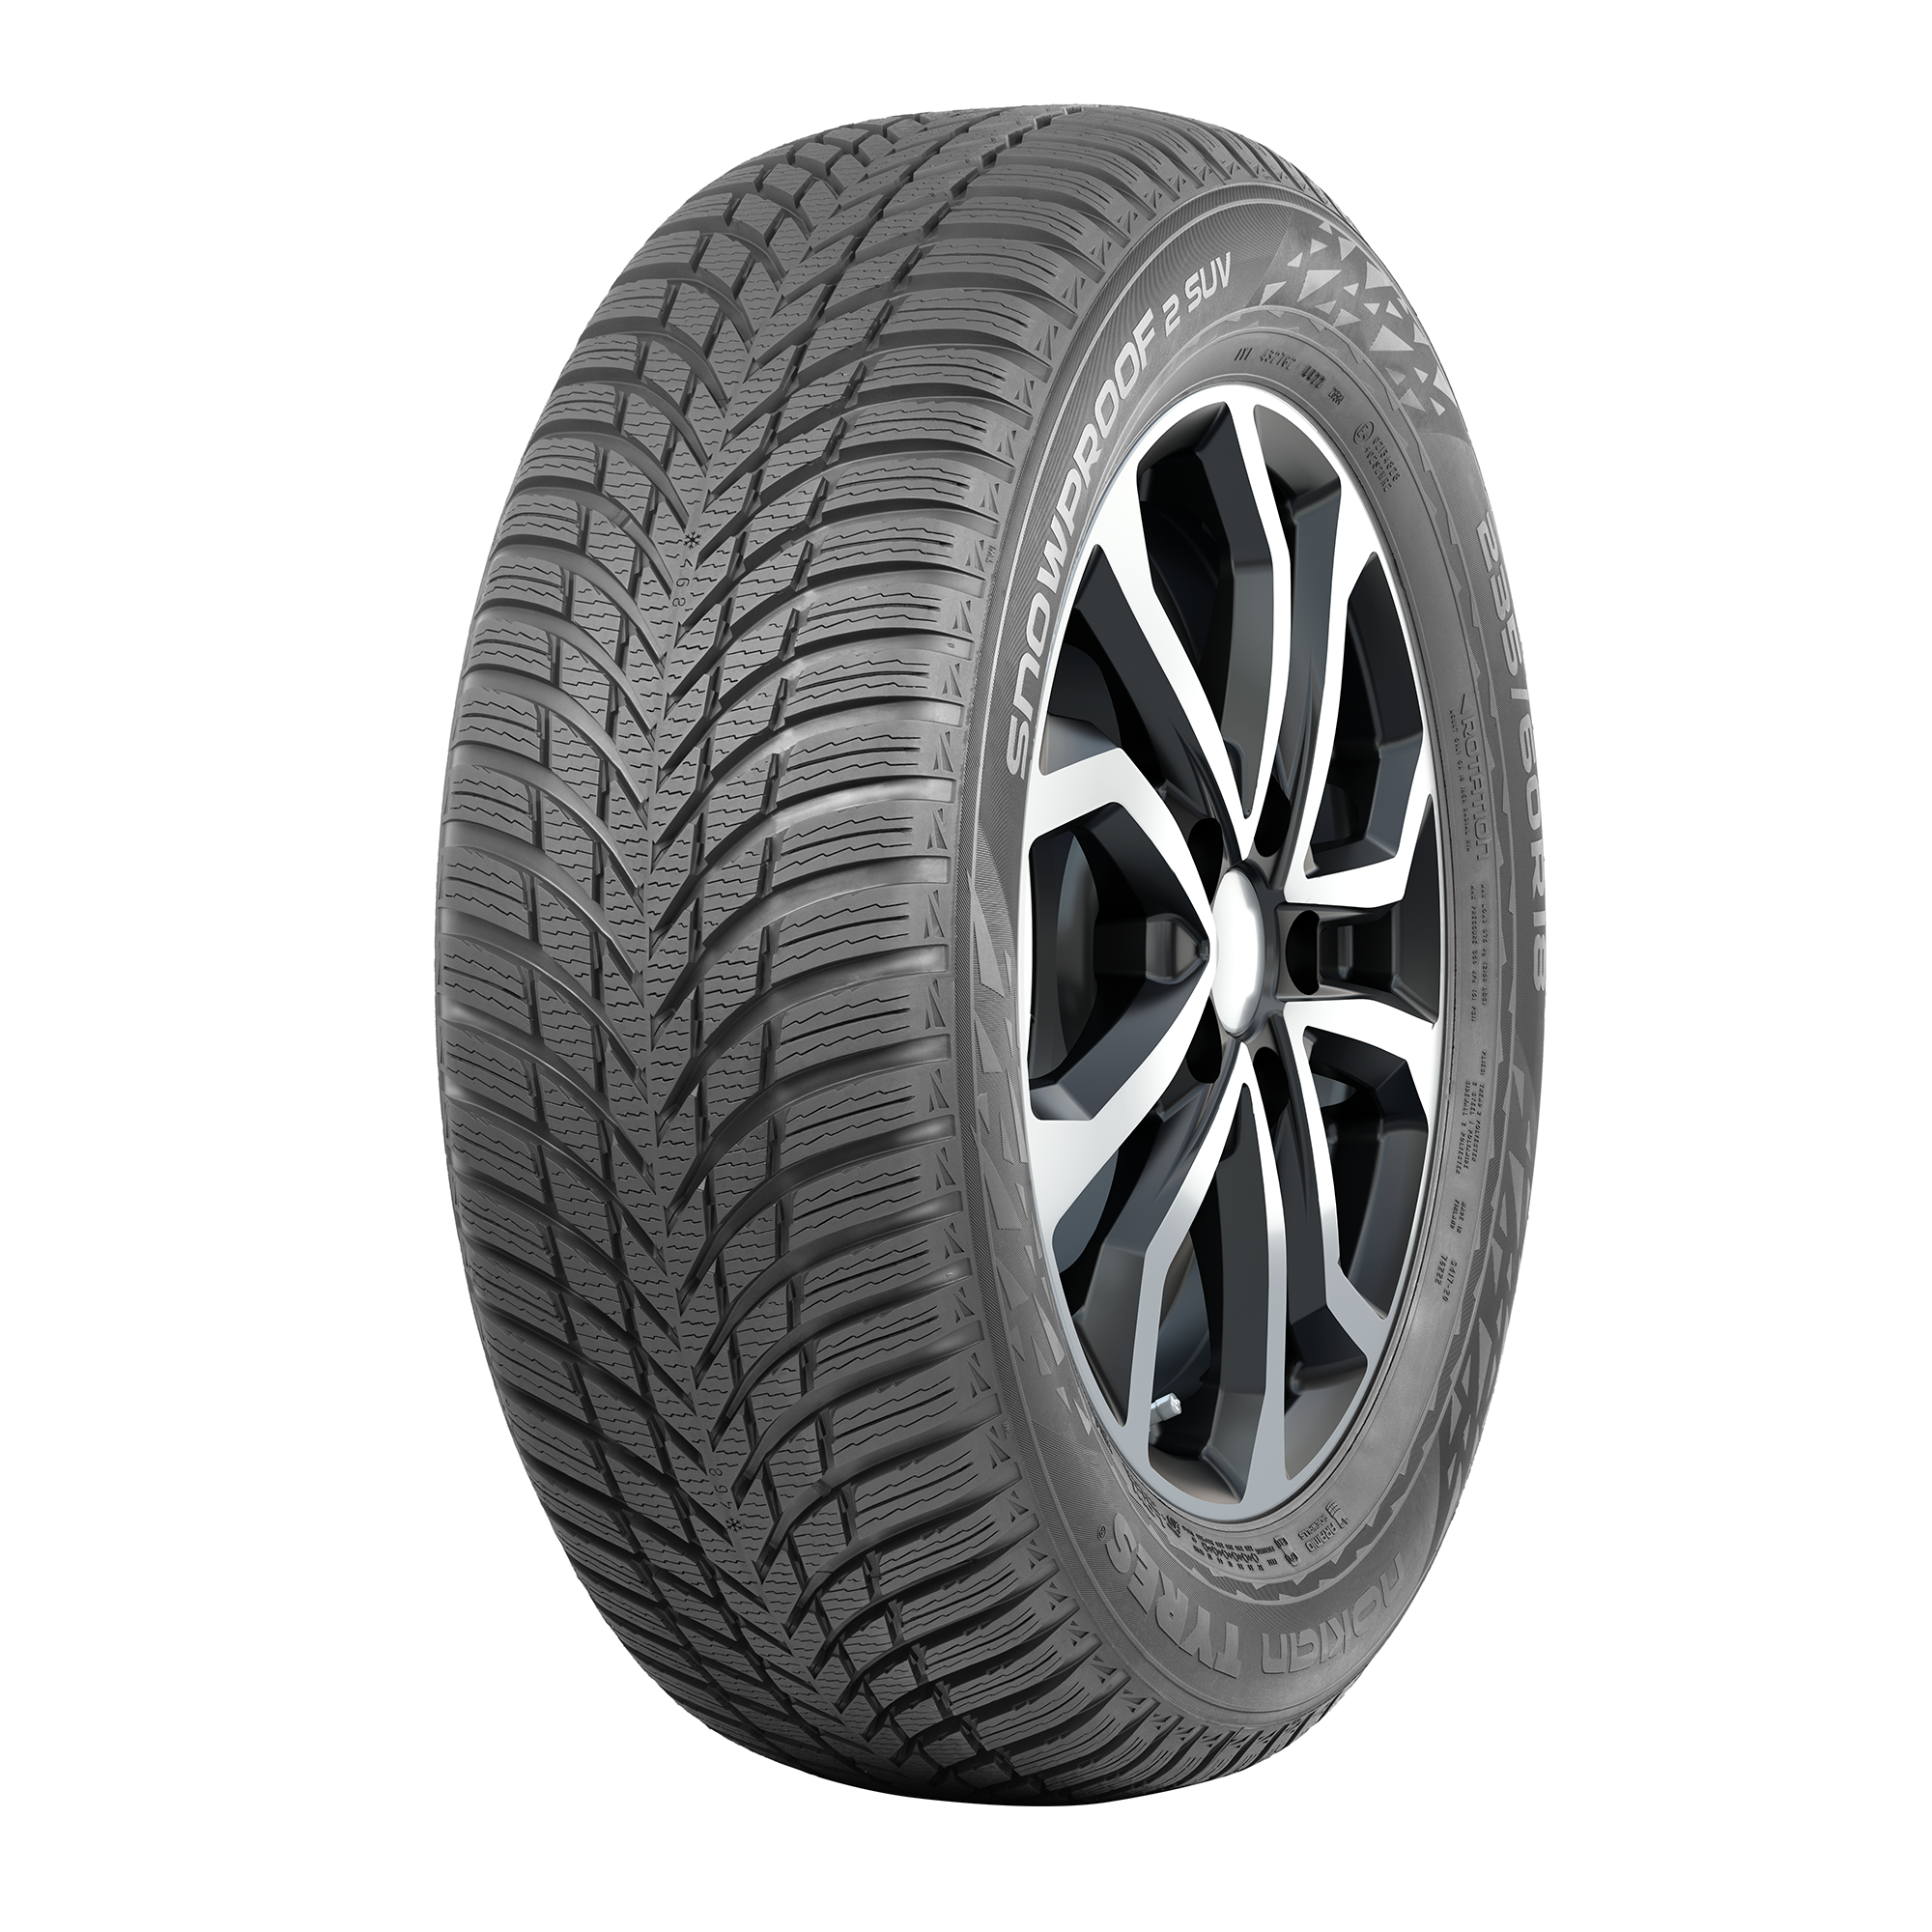 Nokian Tyres Snowproof 2 SUV XL 225/60 R18 104H